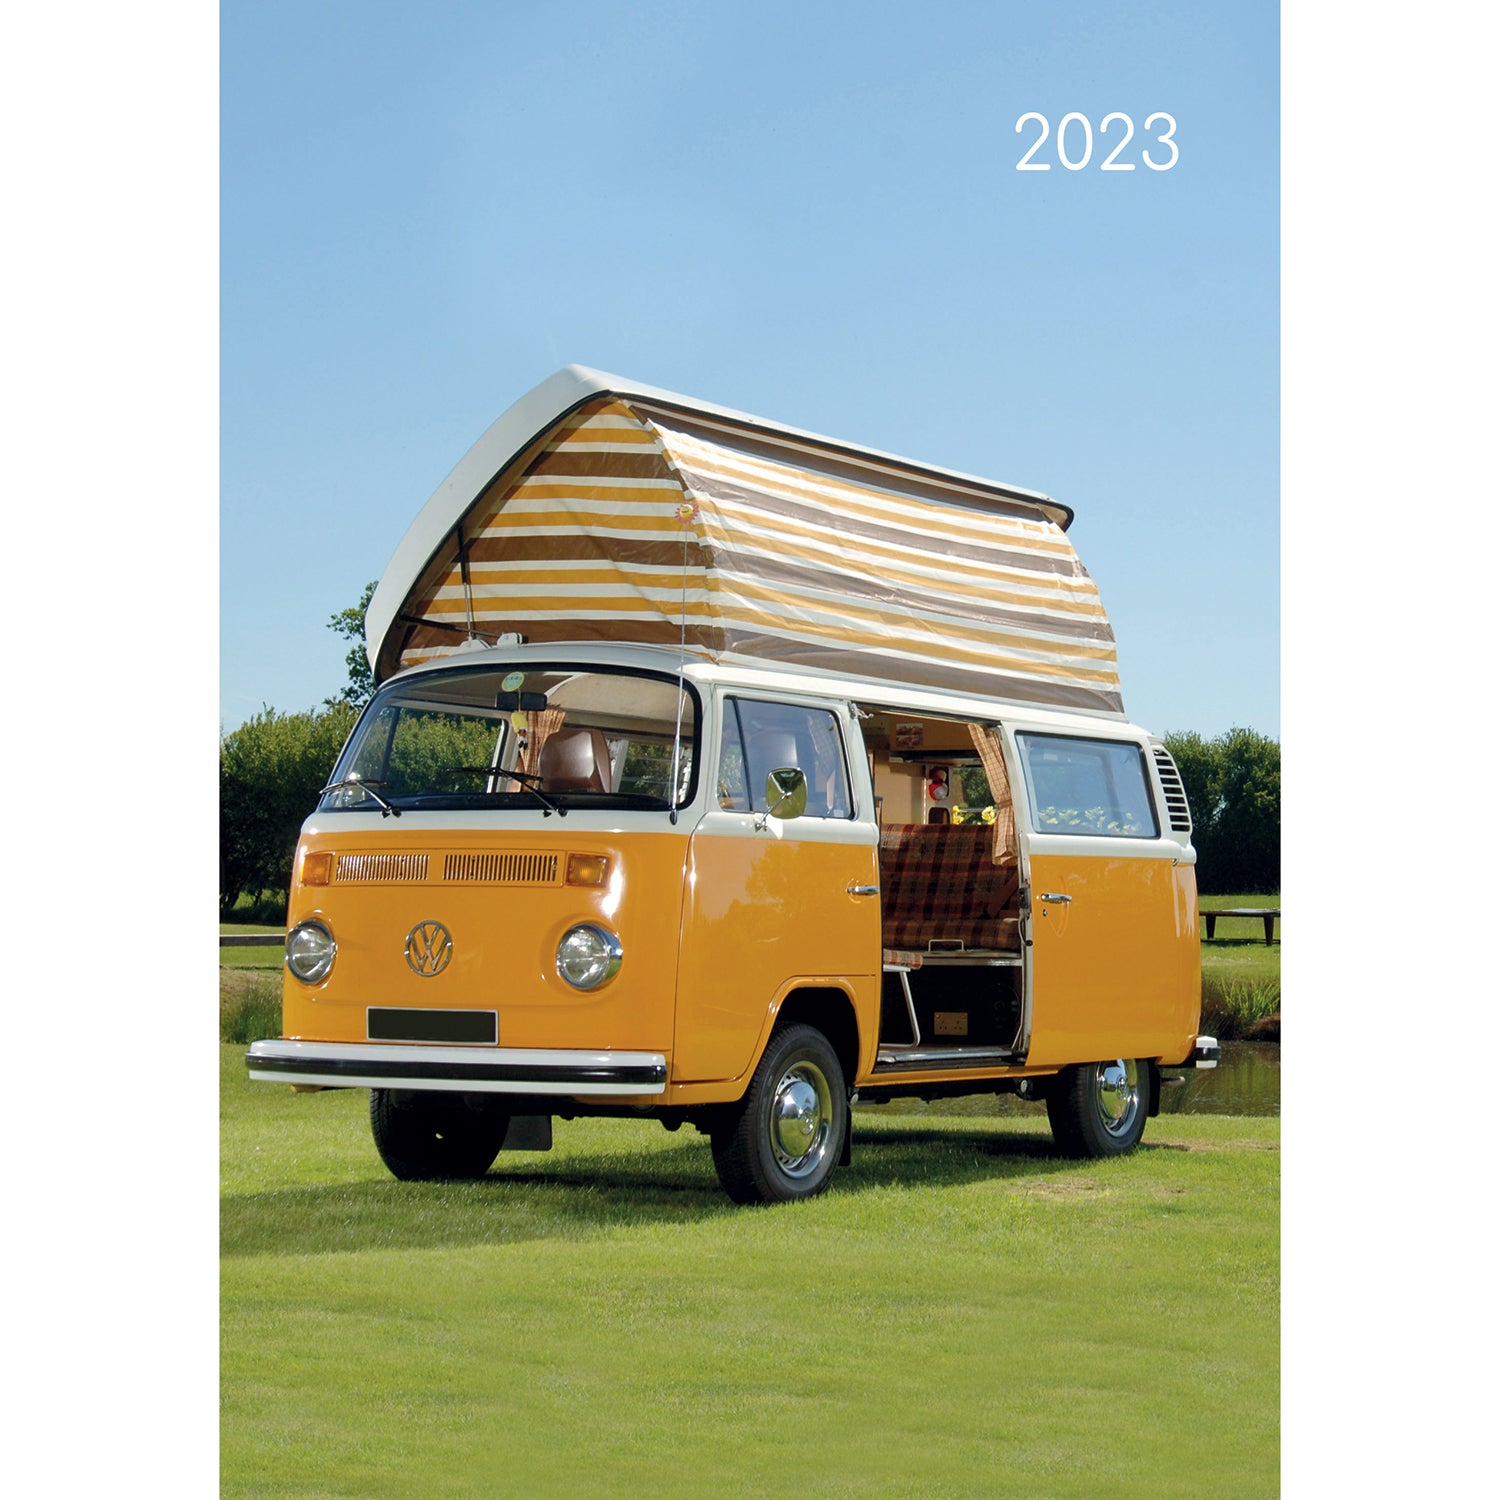 Camper Vans - 2023 A5 Padded Cover Diary Premium Planner Book Xmas New Year Gift - Zmart Australia